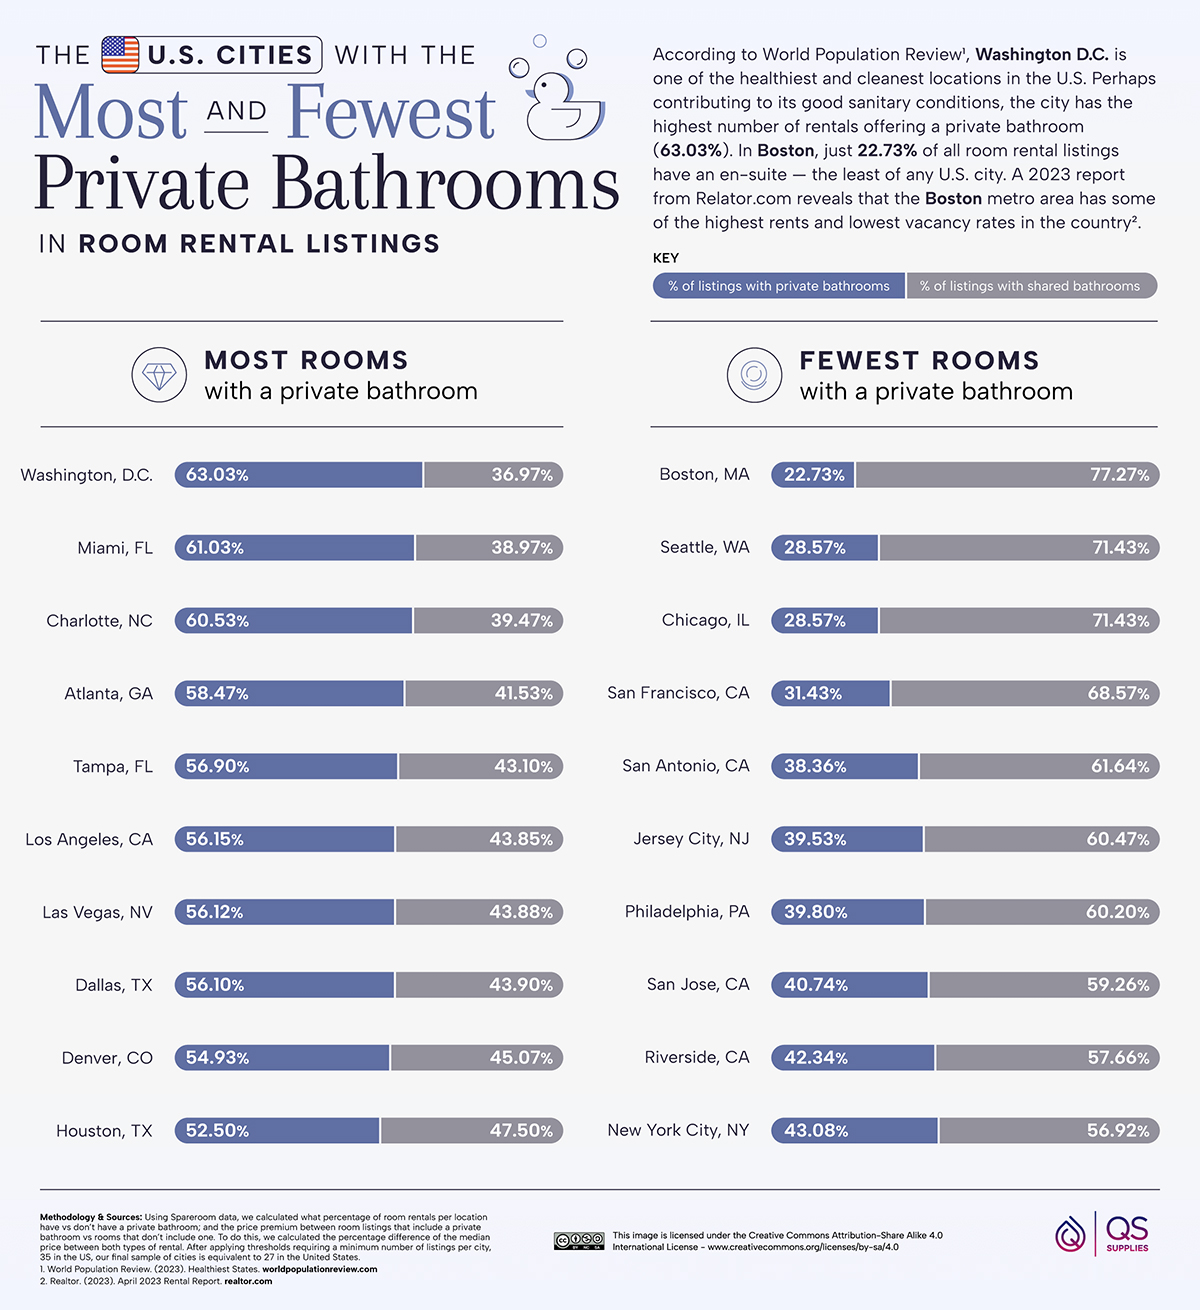 US Cities With Most and Feweset Private Bathrooms